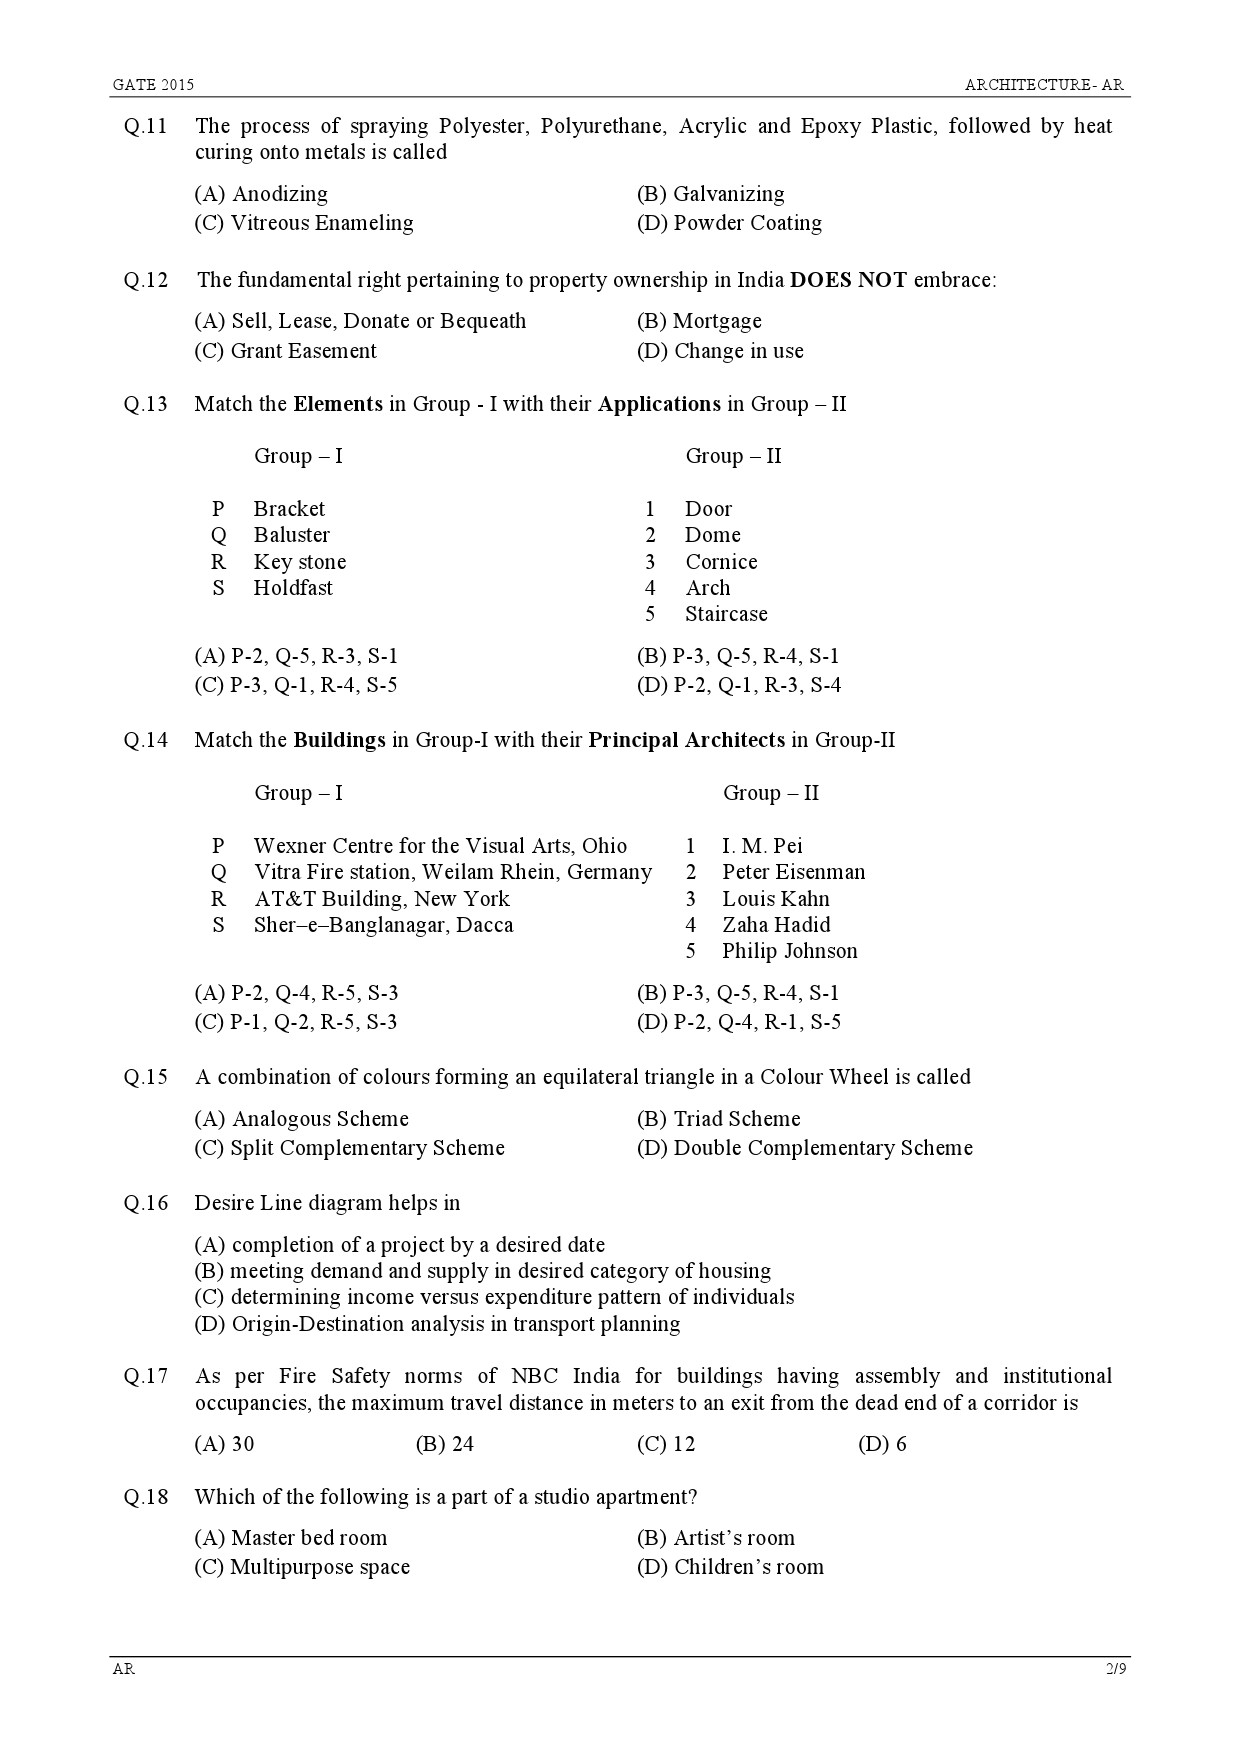 GATE Exam Question Paper 2015 Architecture and Planning 2